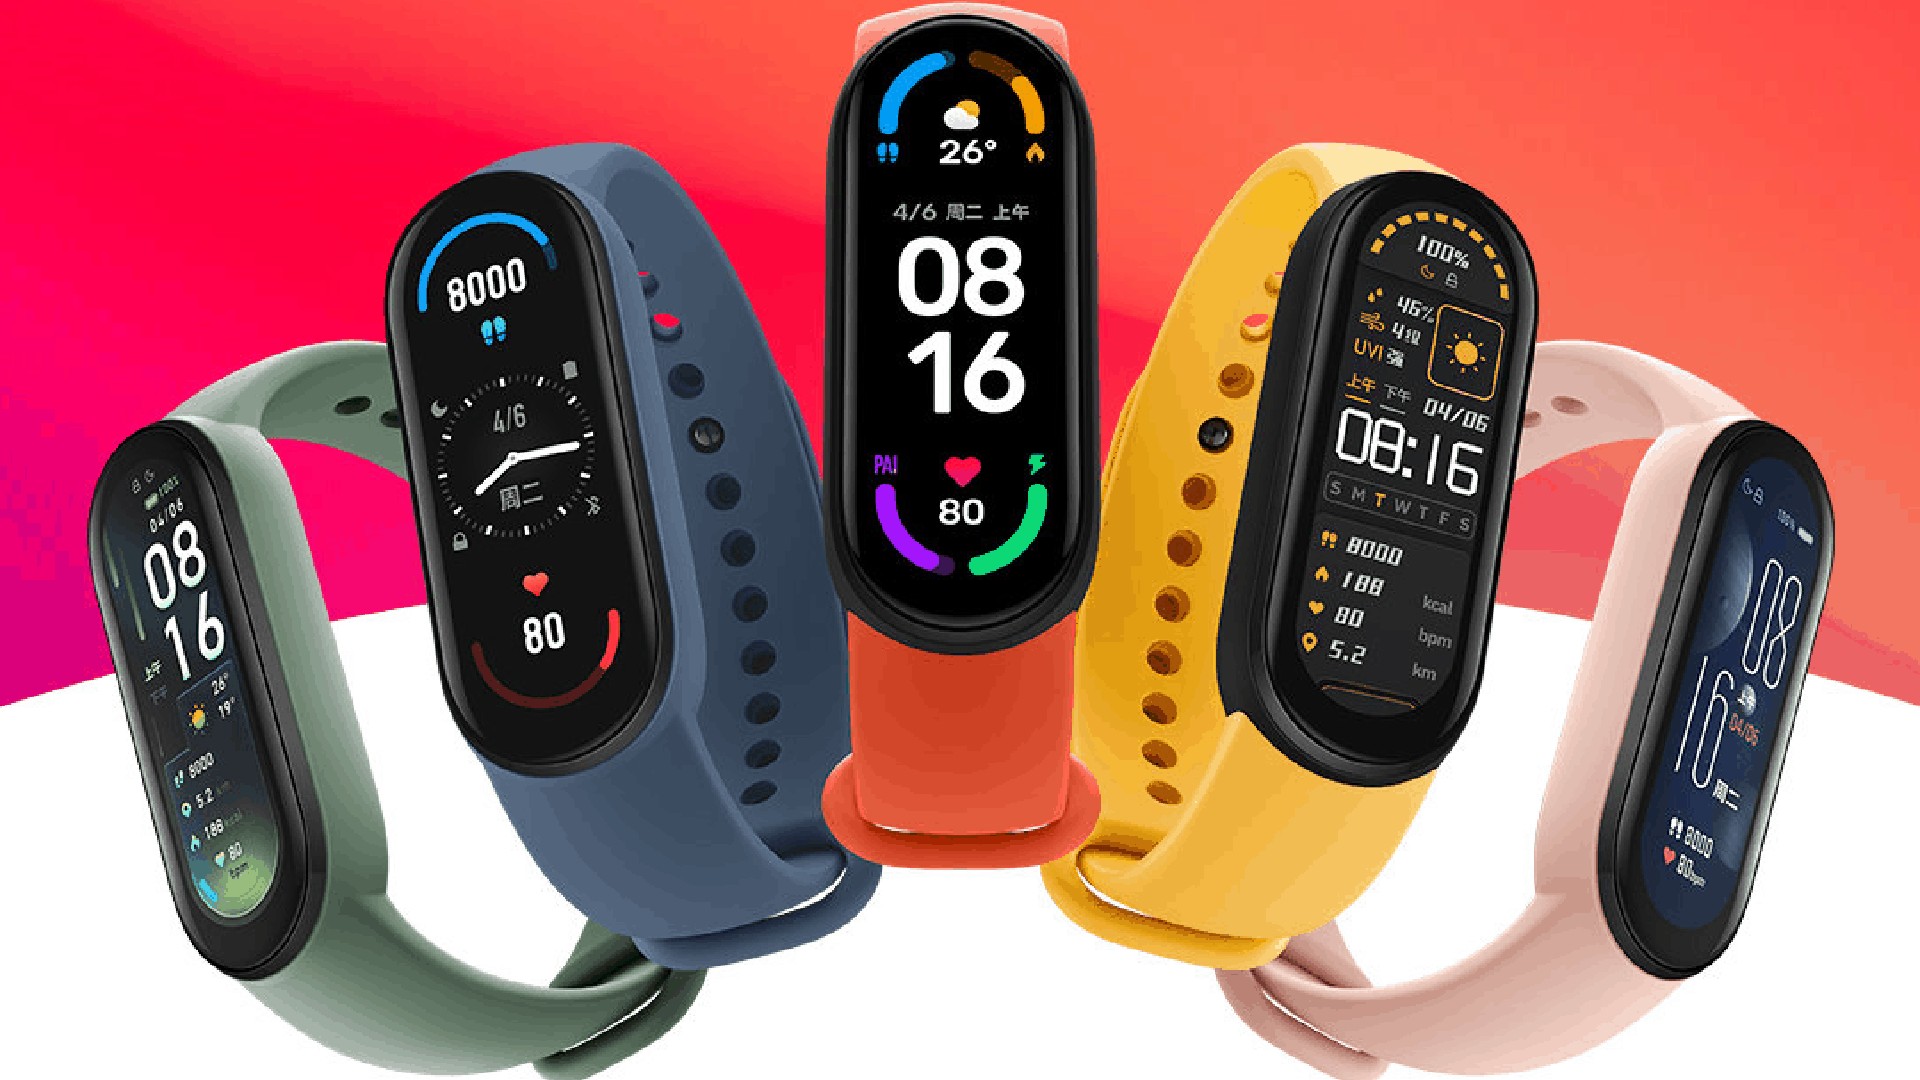 Mi Band 6 Price In India Rs 2,299? Expected In June, Mi Band 6 India Launch Date